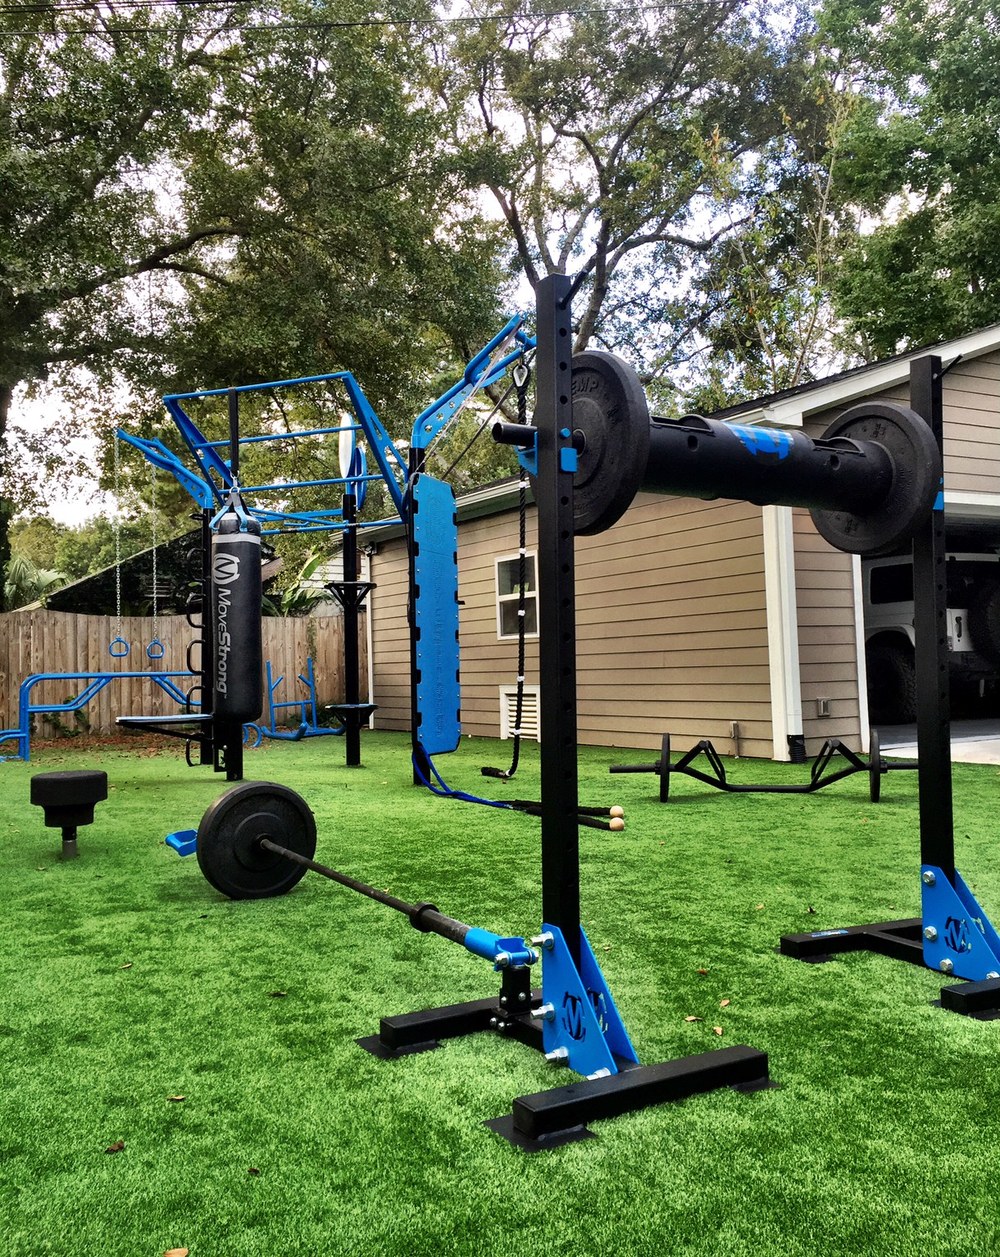 The Ultimate Backyard Gym by MoveStrong - MoveStrong